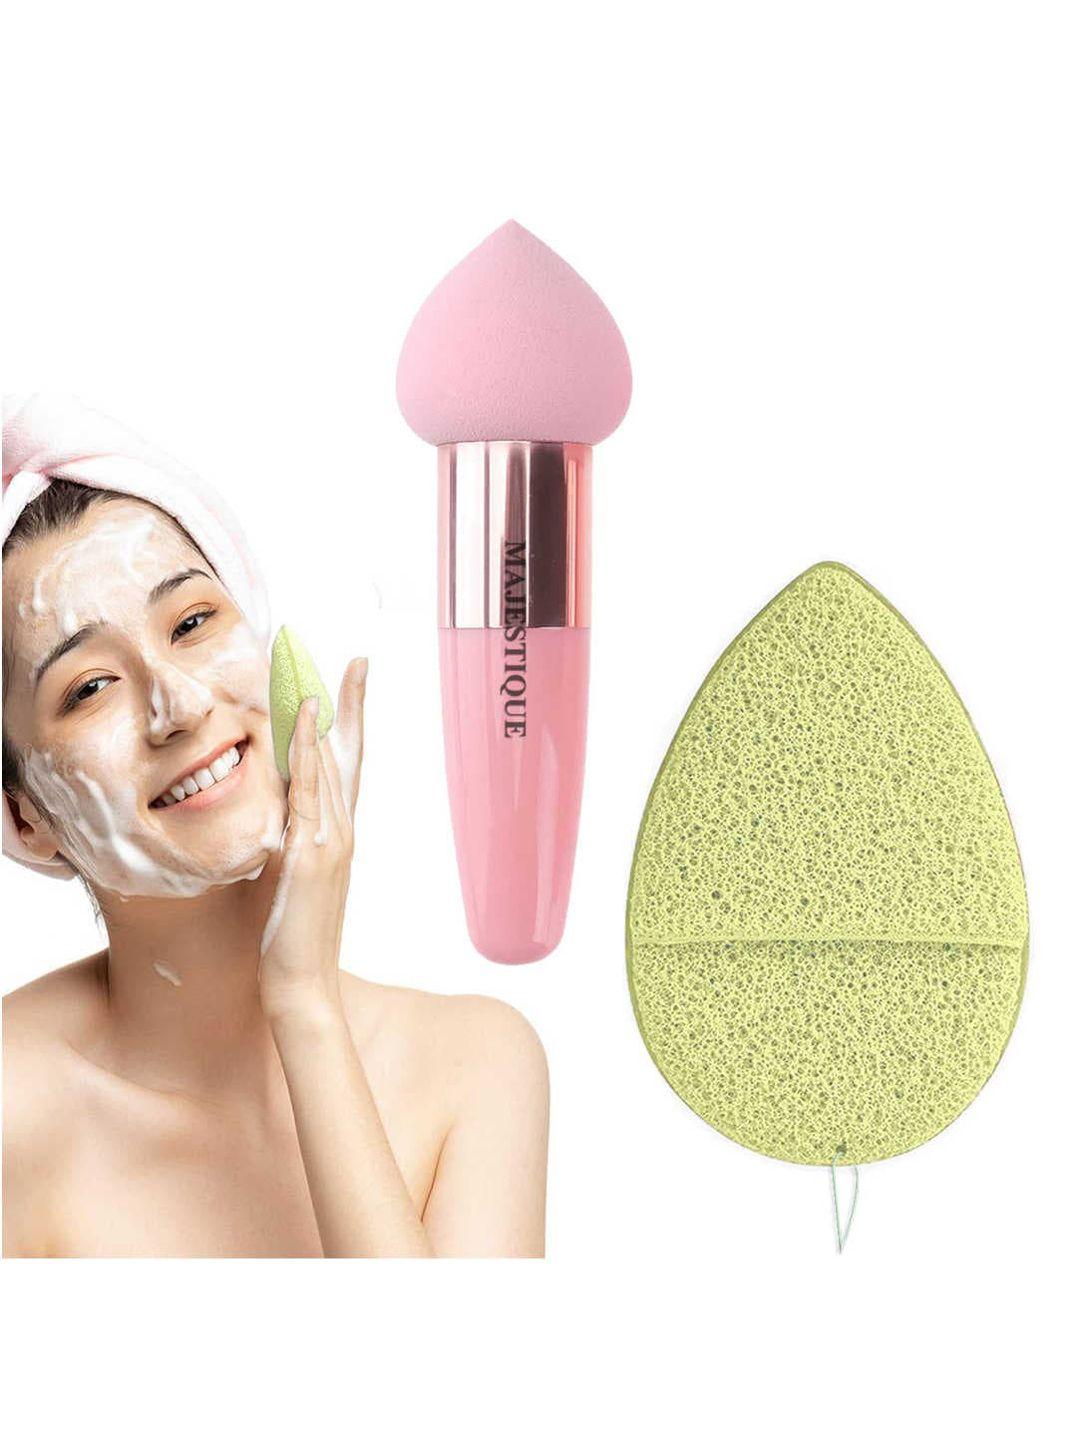 majestique facial cleaning sponge with pointed makeup sponge